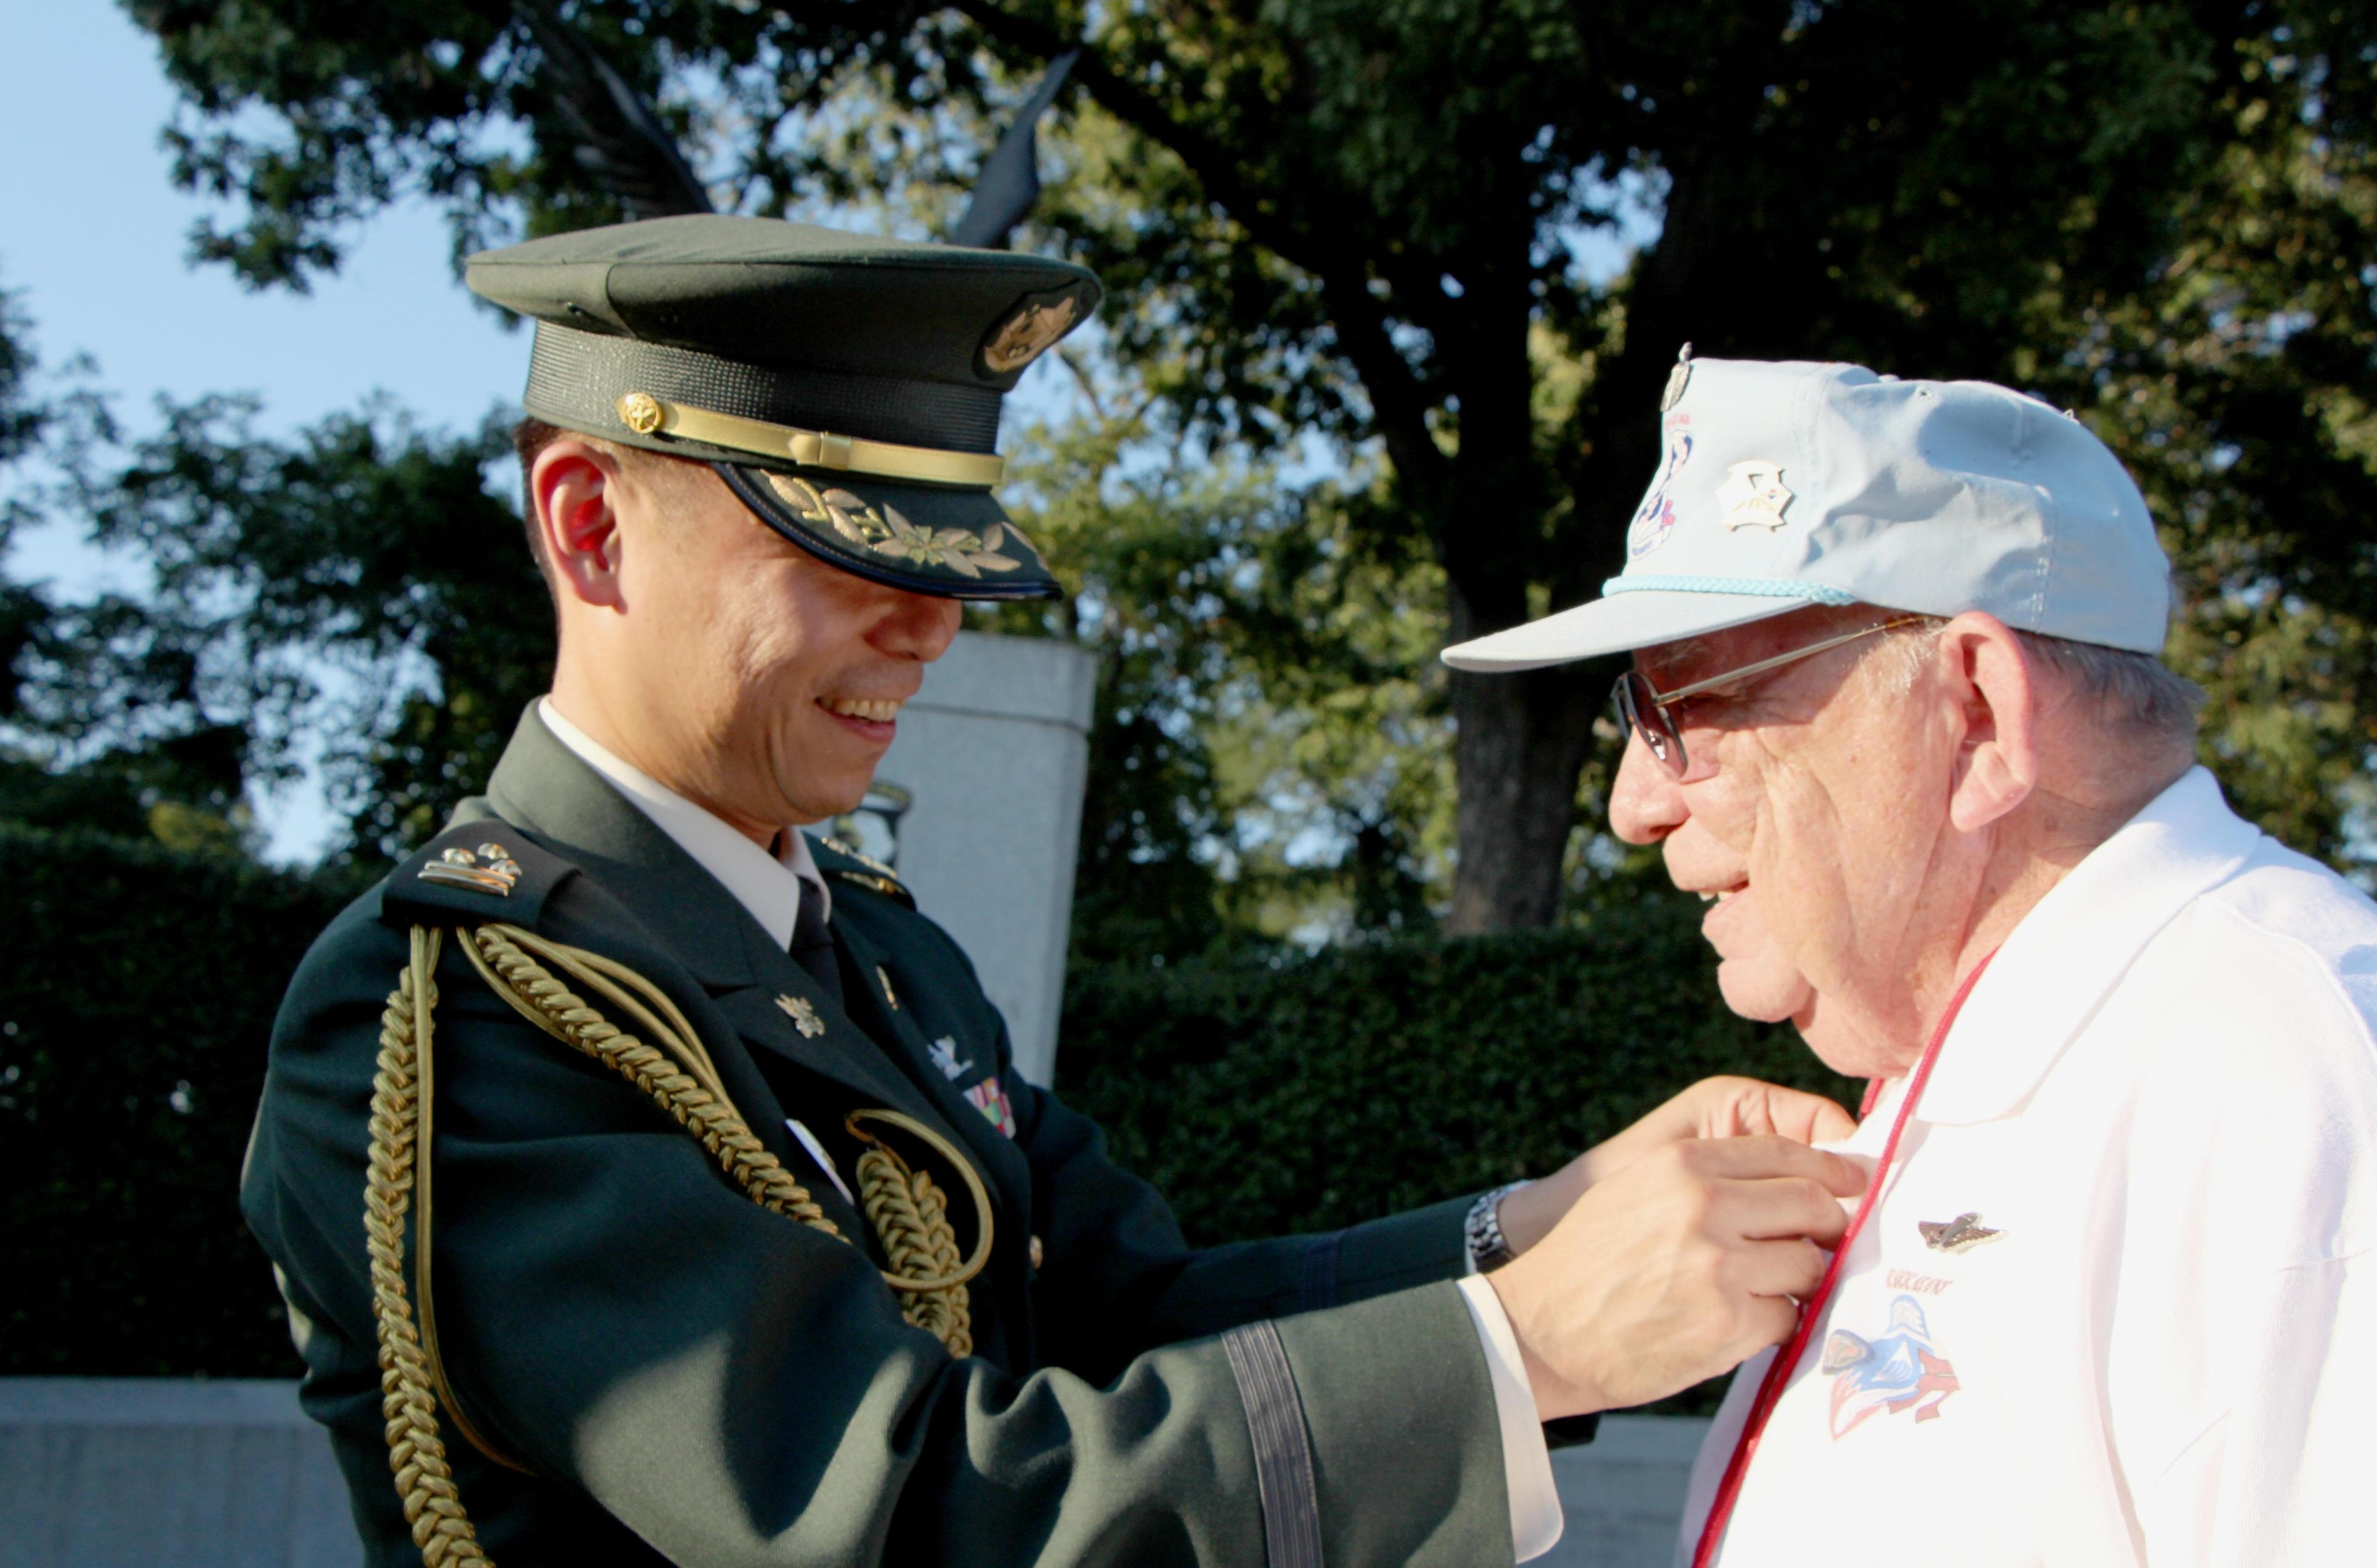 Masashi Yamamoto, a Ground Self-Defense Force colonel, awards a Japanese paratrooper's badge to U.S. veteran William LaRou on Wednesday at Arlington Cemetery in Virginia. | KYODO